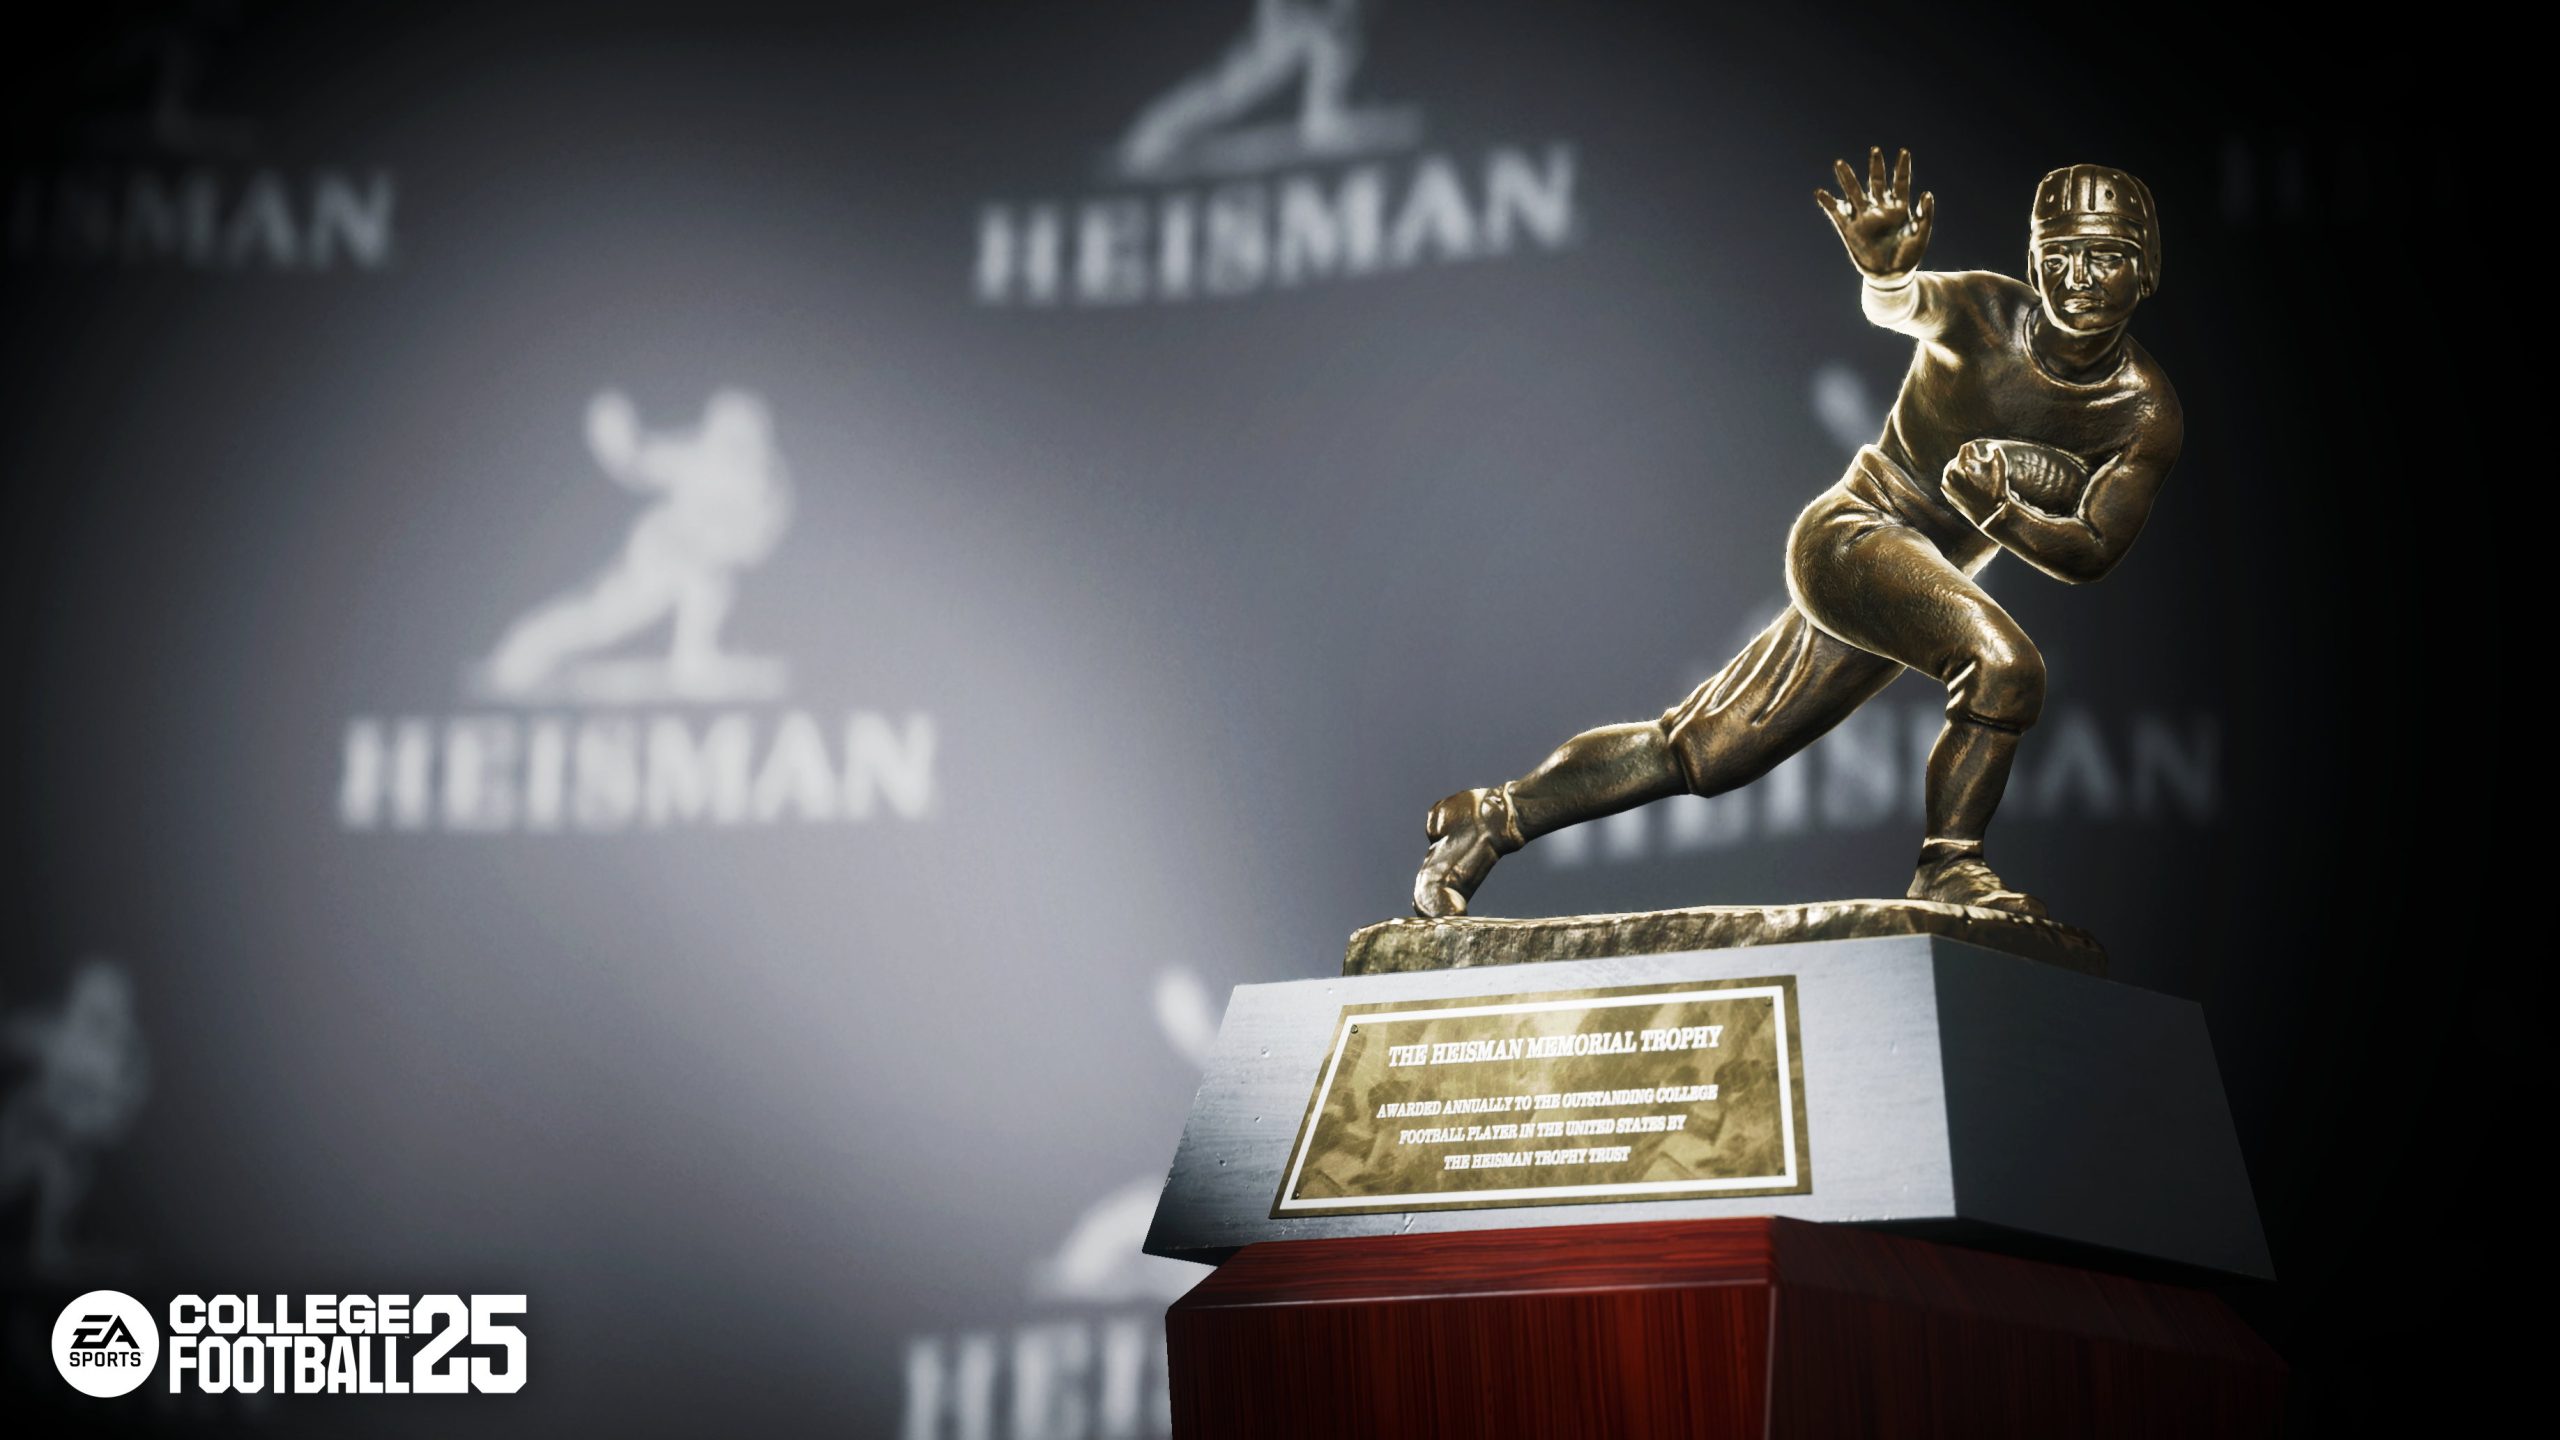 The Heisman Trophy in front of a background showing the trophy's logo